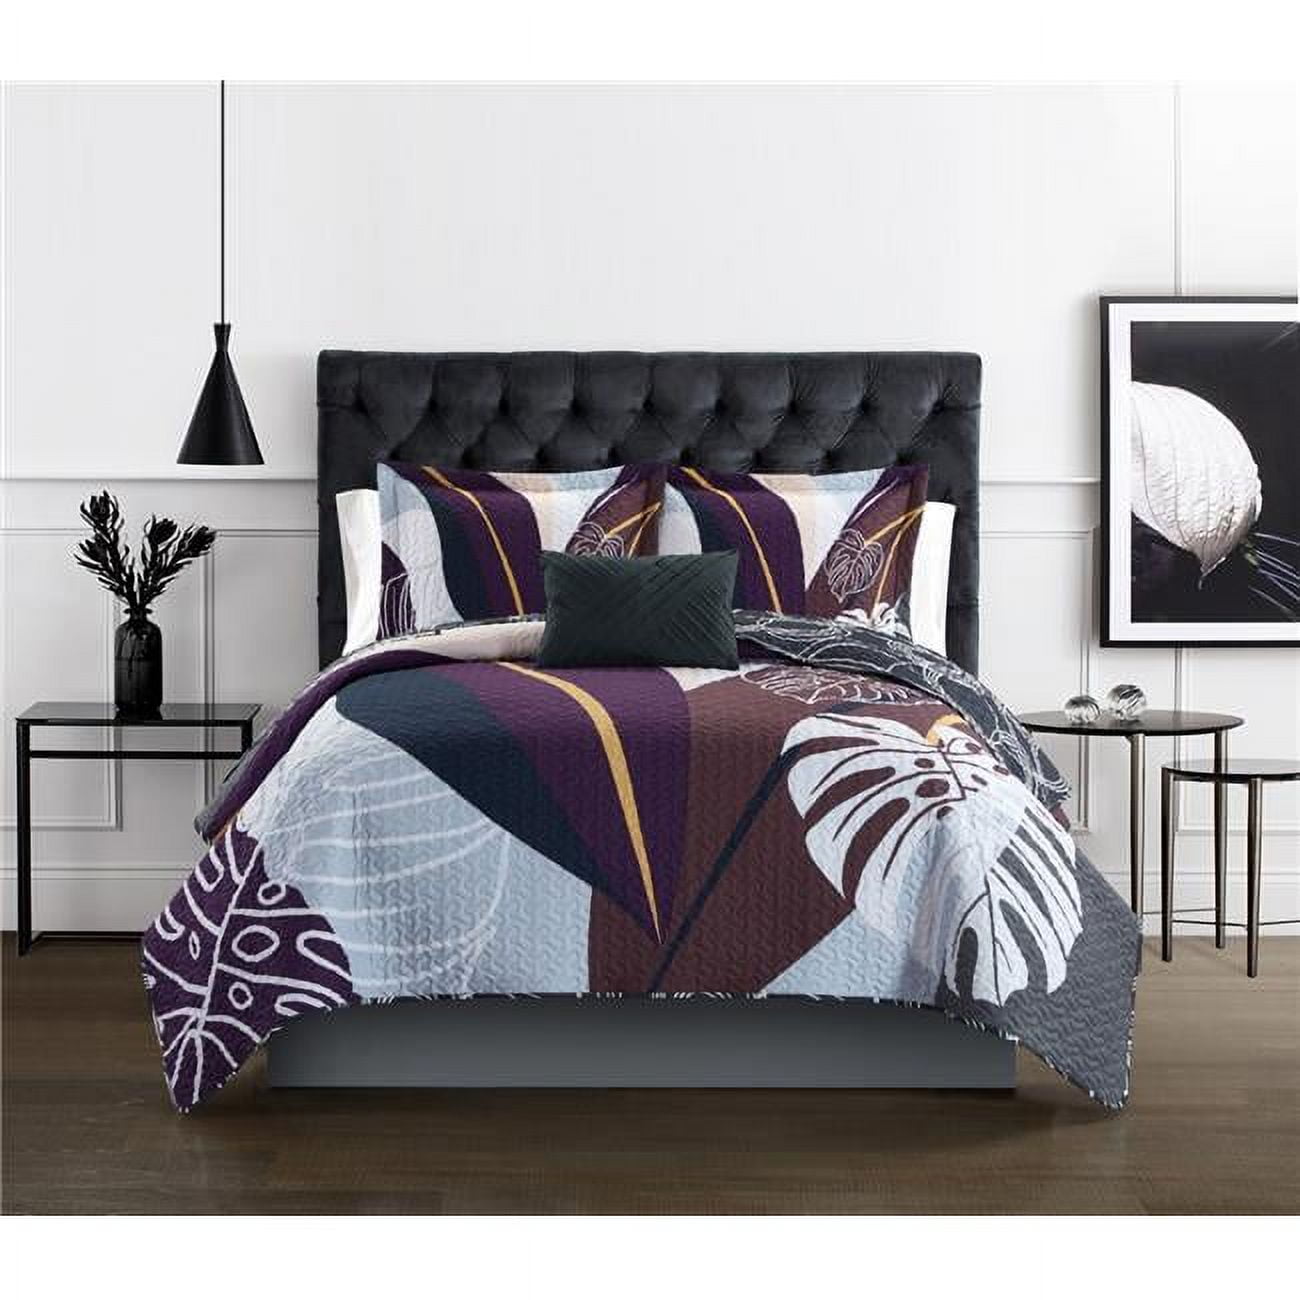 Picture of Chic Home BQS16553-BIB-US Alya Quilt Set with Large Scale Abstract Floral Pattern Print King Bed in a Bag - Sheet Set Decorative Pillow Shams&#44; Multi Color - 8 Piece